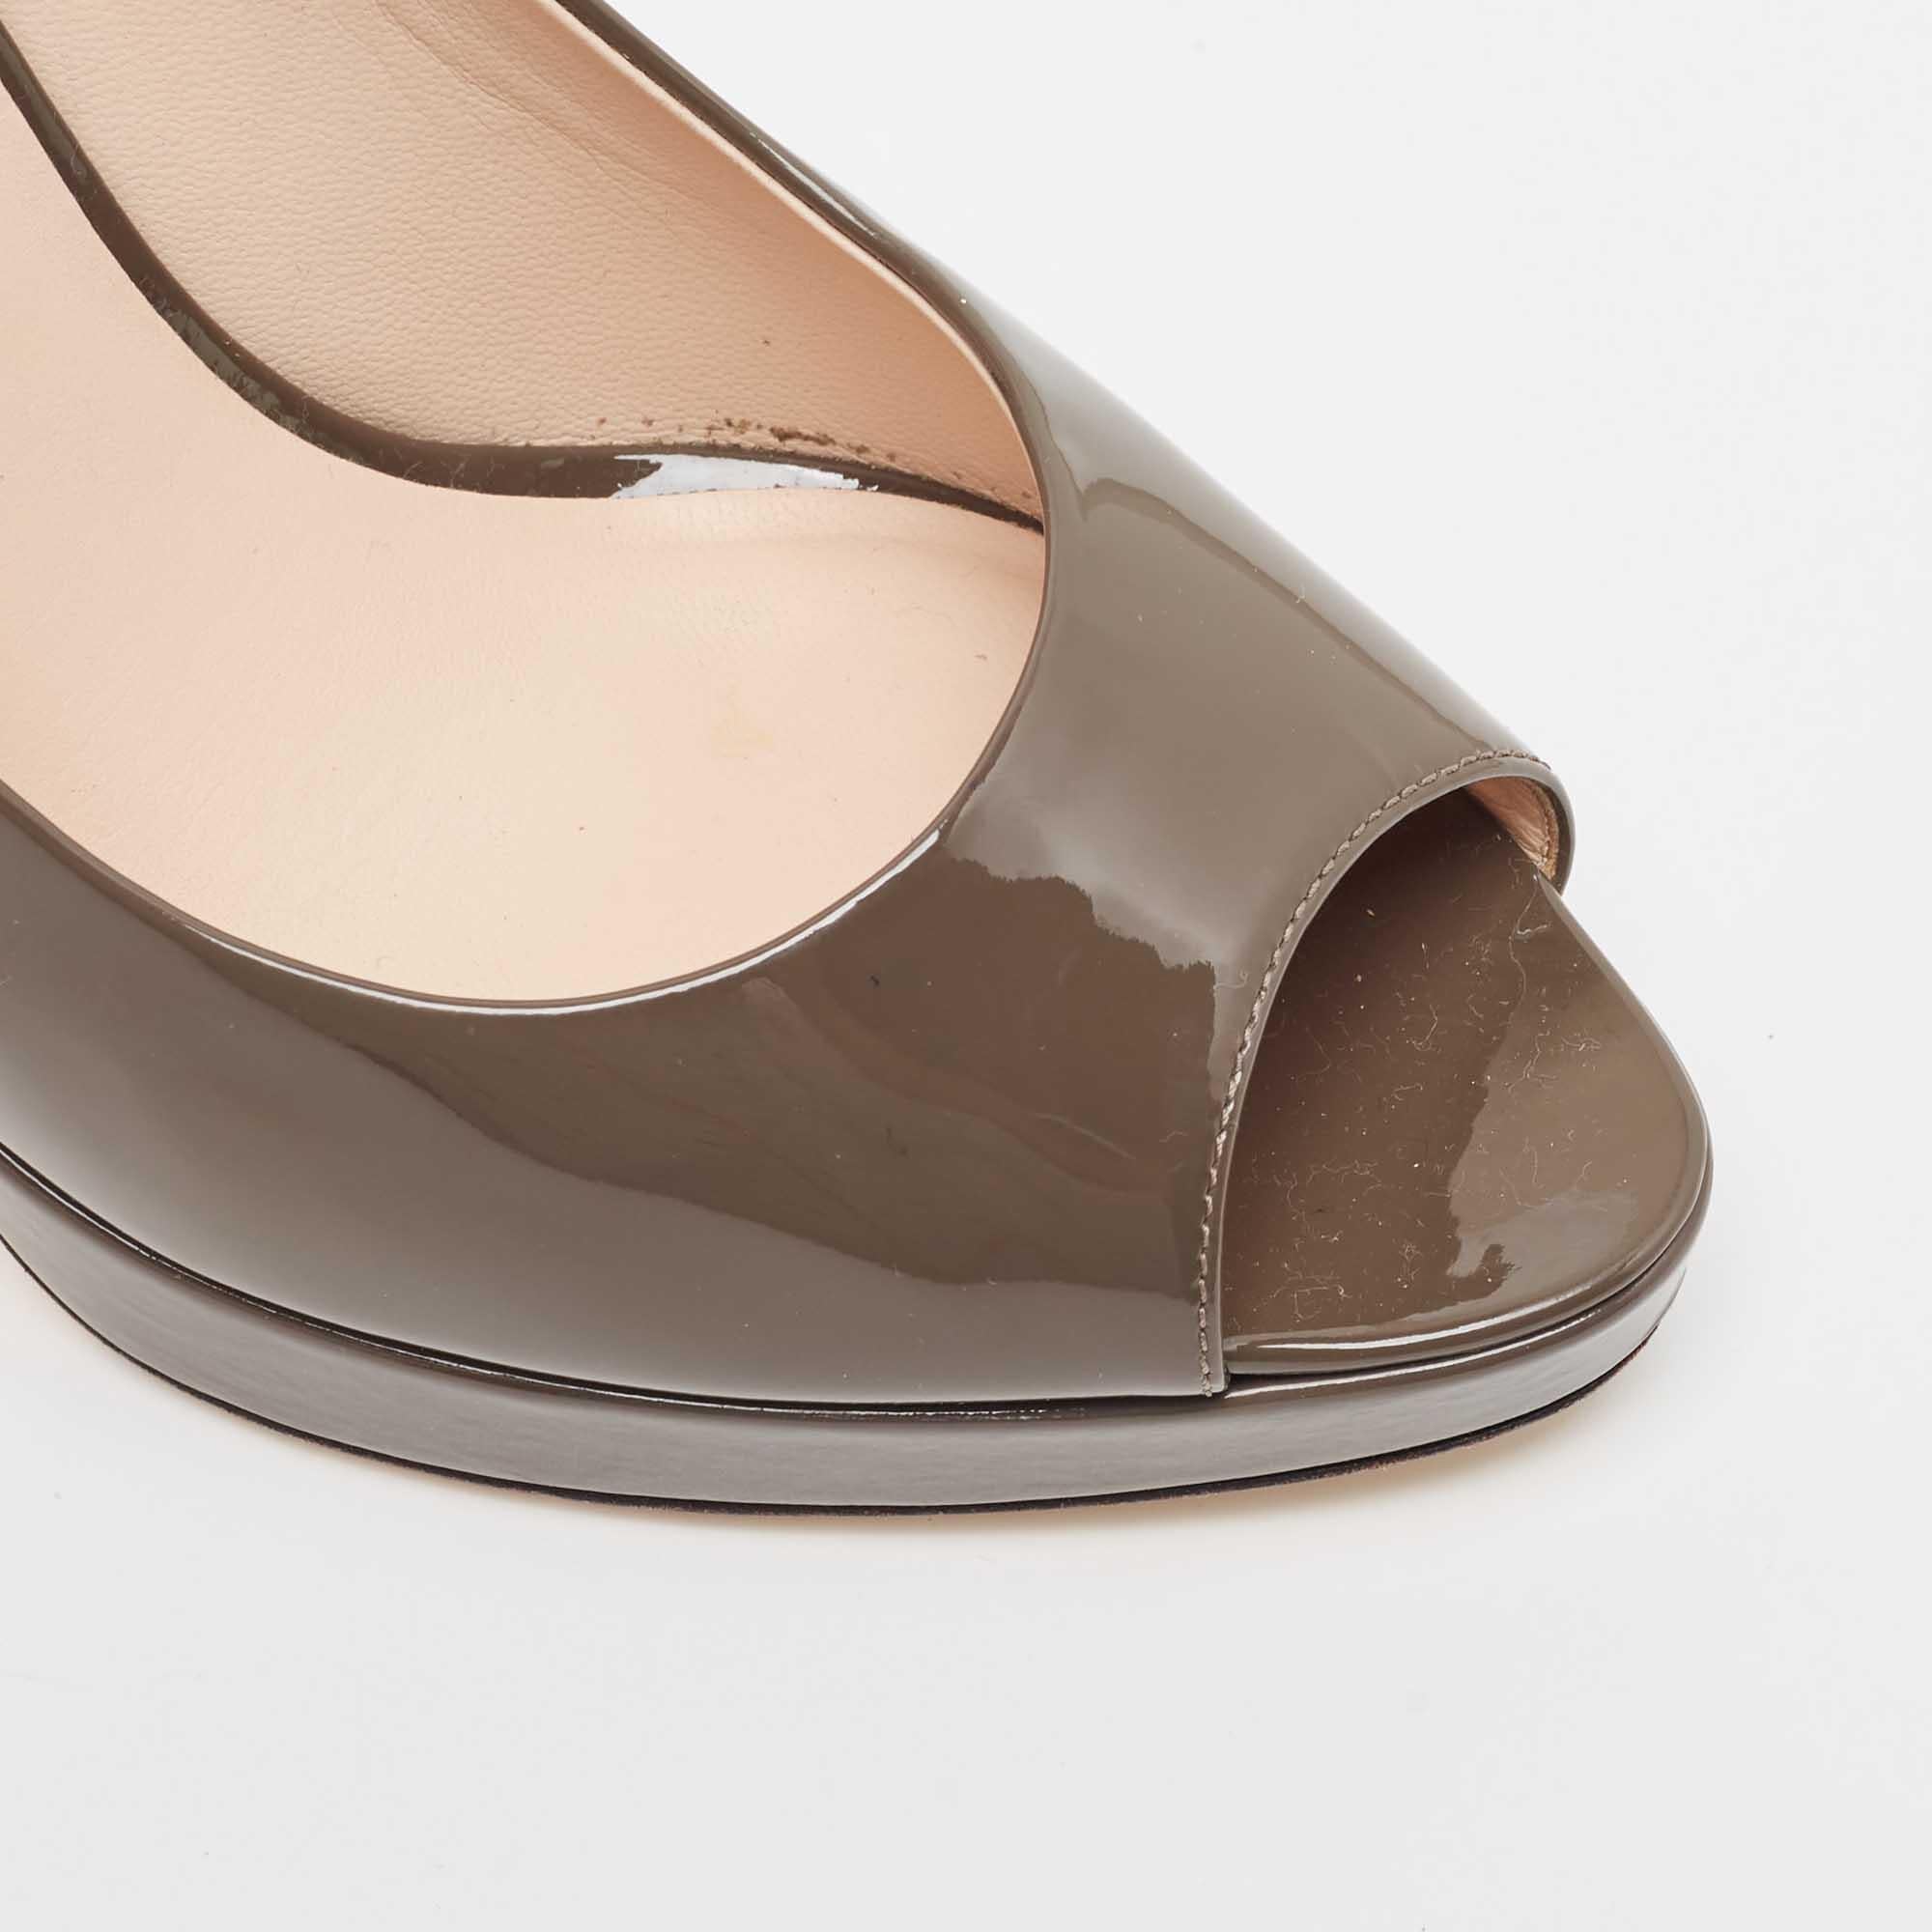 Fendi Brown Patent Leather Peep Toe Pumps Size 37 For Sale 1